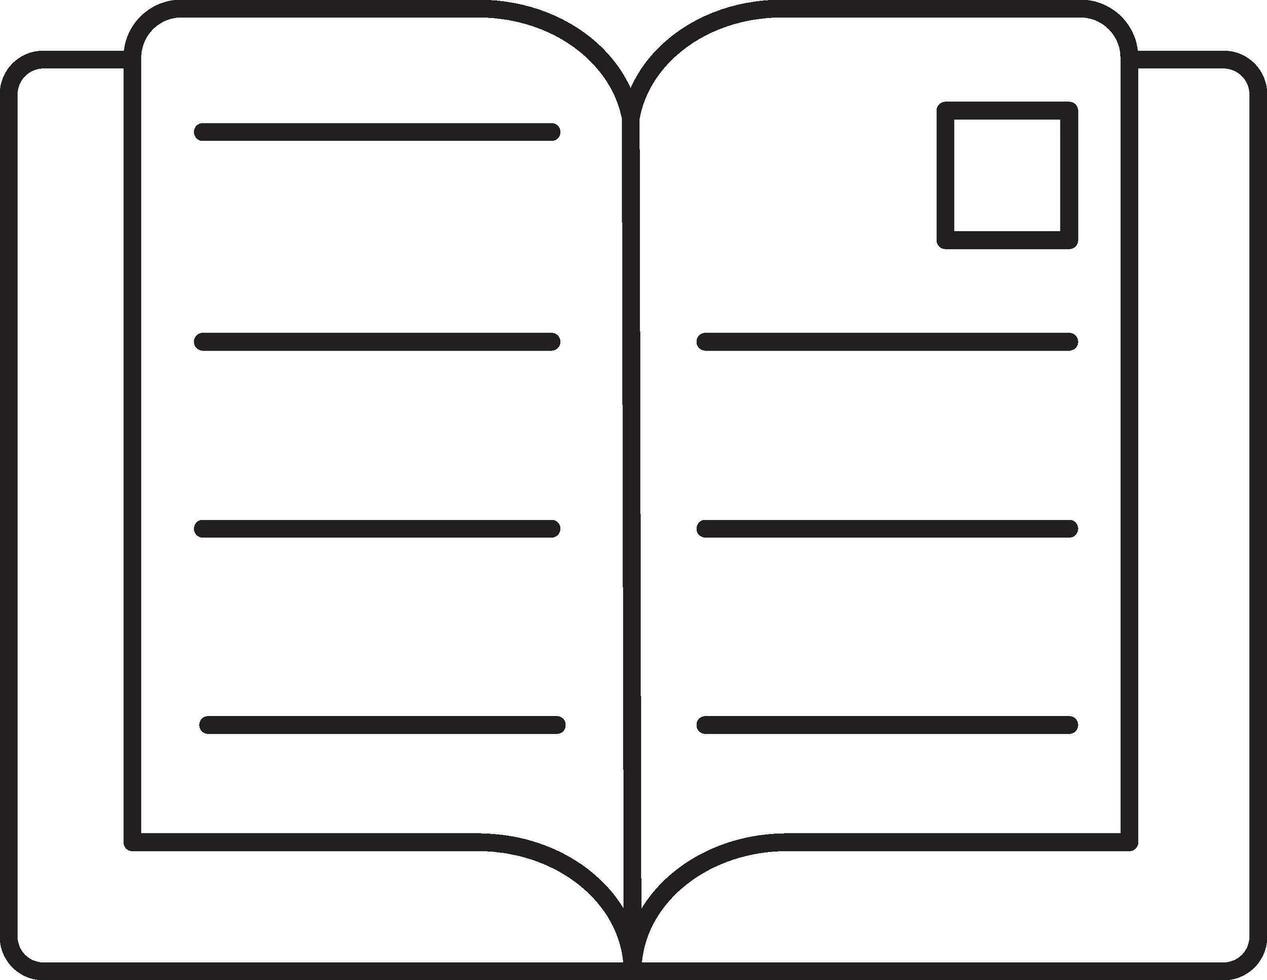 Illustration Of Open Book Icon In Black Outline Style. vector